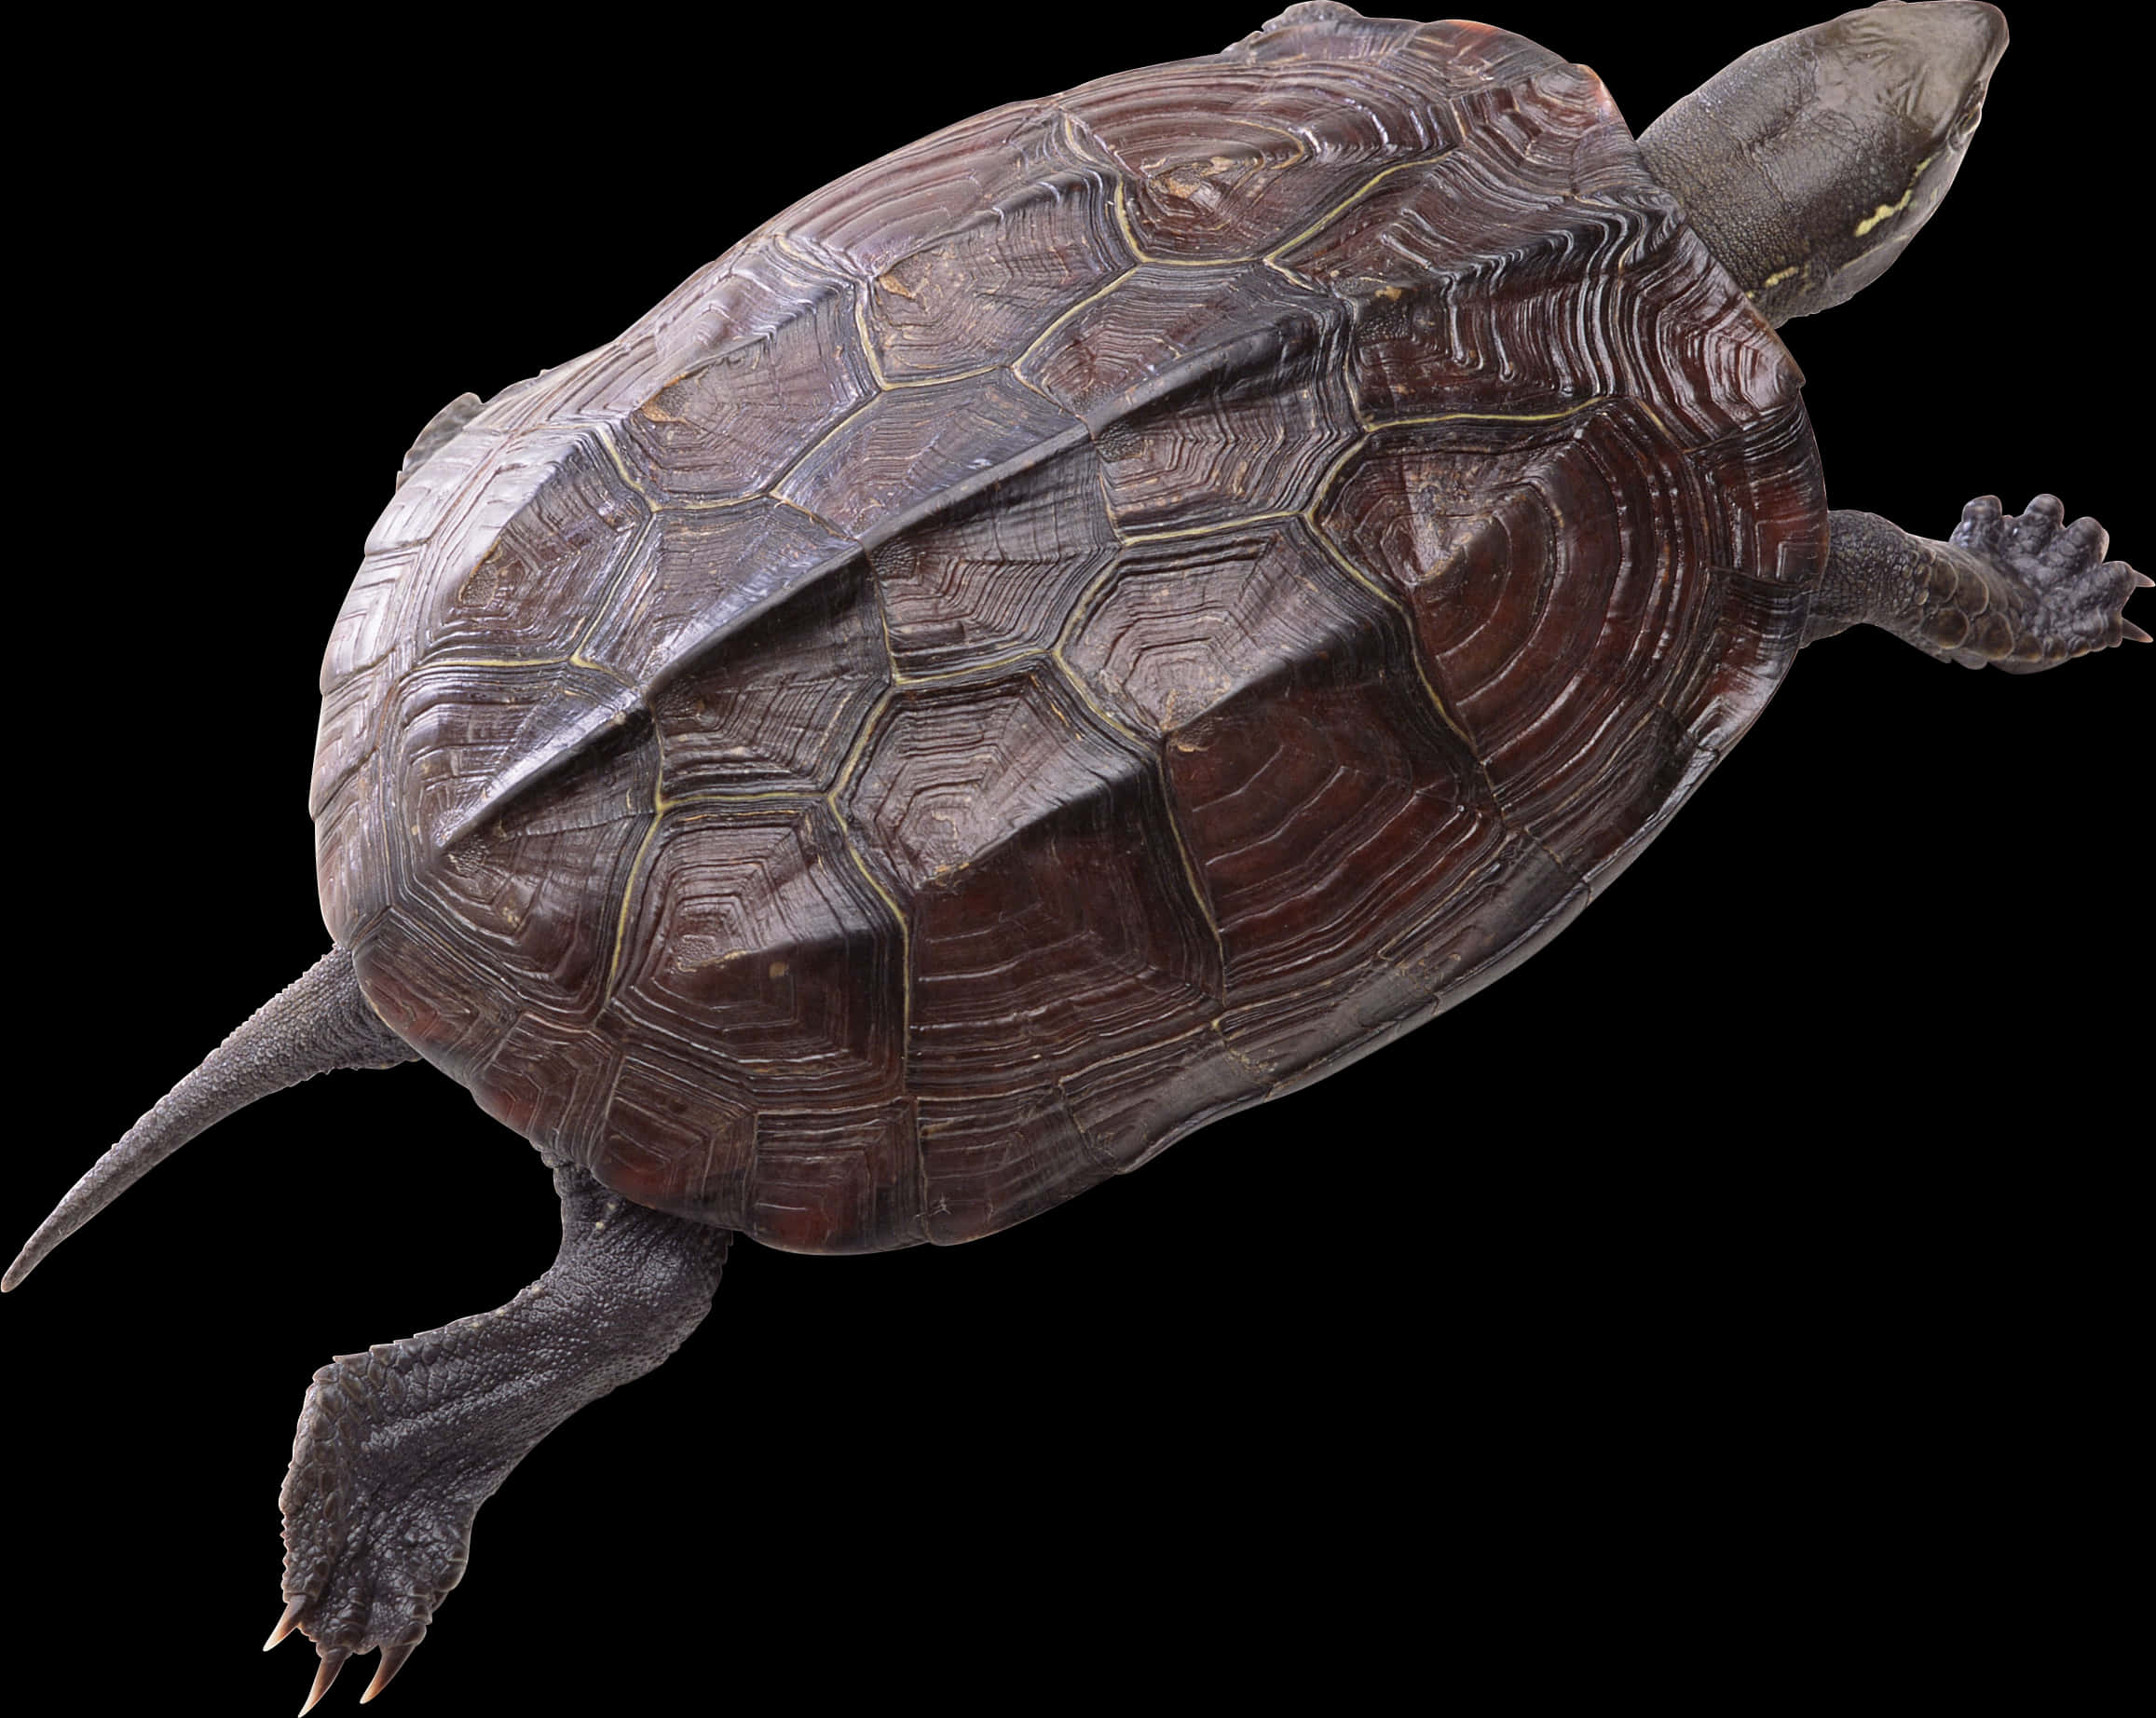 A Turtle On A Black Background